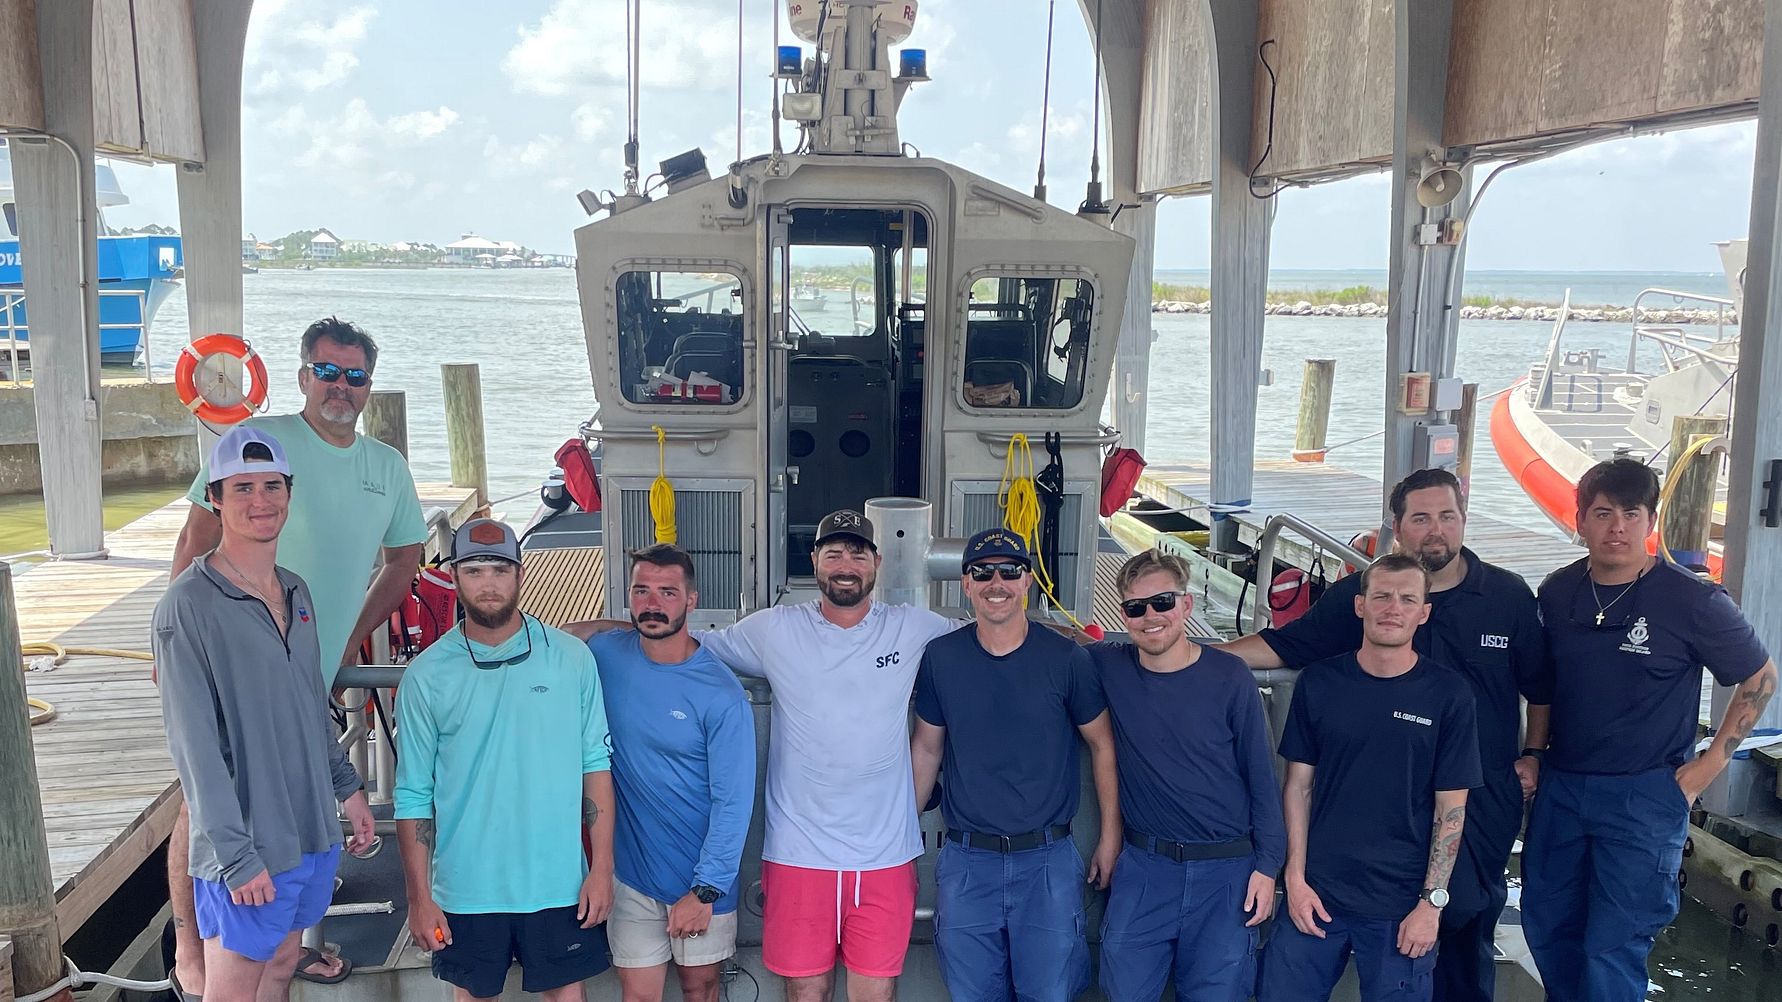  Girlfriend’s 21st birthday present saves Five Lives off Mississippi Gulf Coast on Memorial Weekend